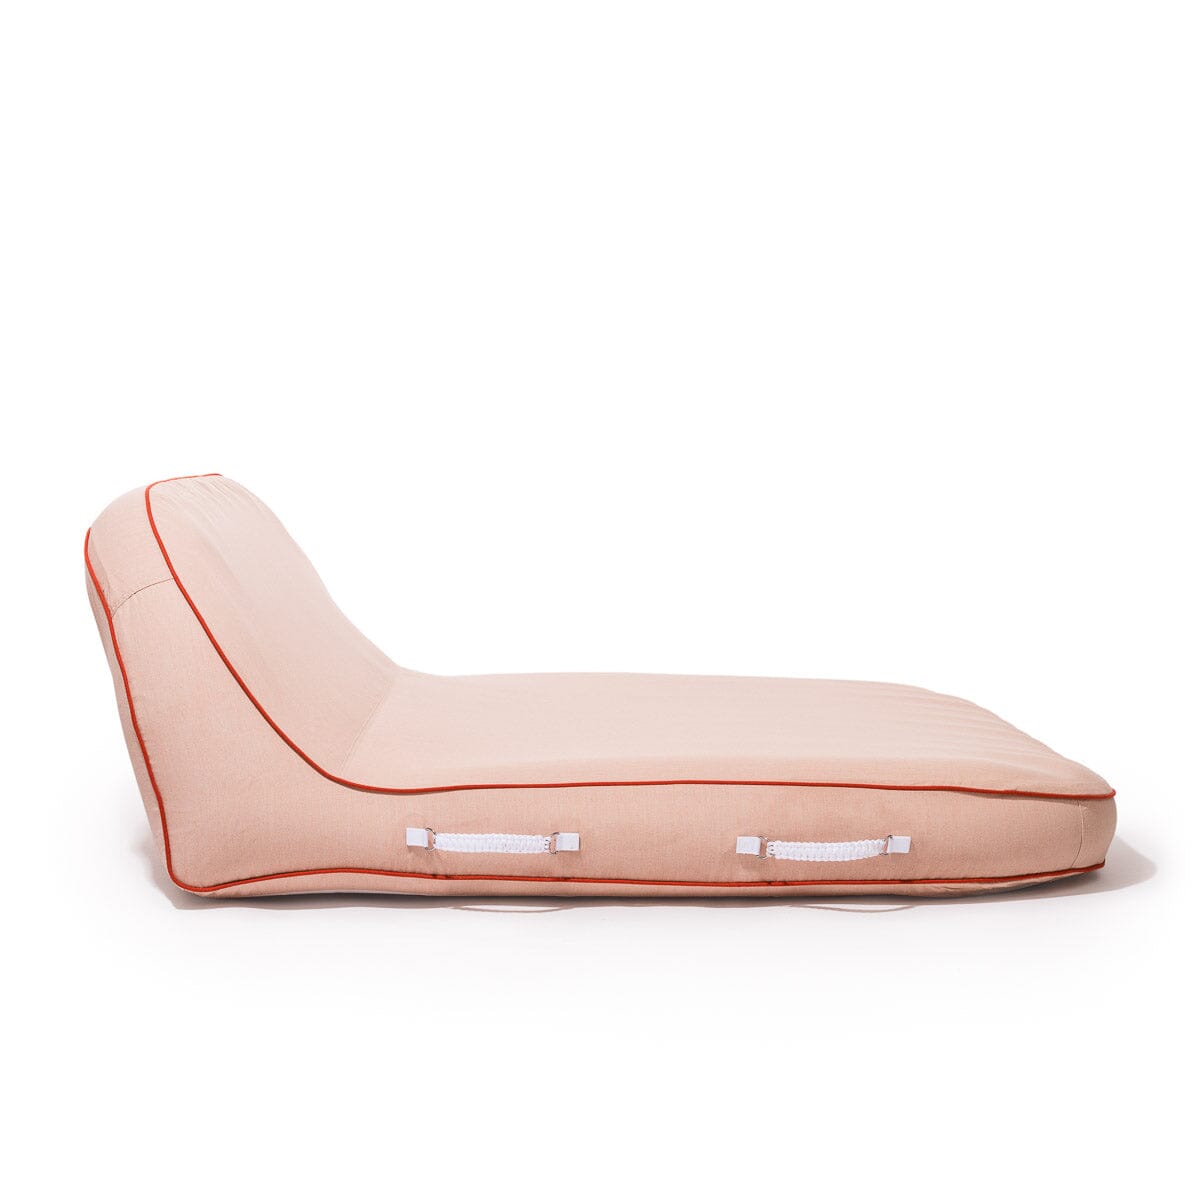 The XL Pool Lounger - Rivie Pink Pool Lounger Business & Pleasure Co Aus 